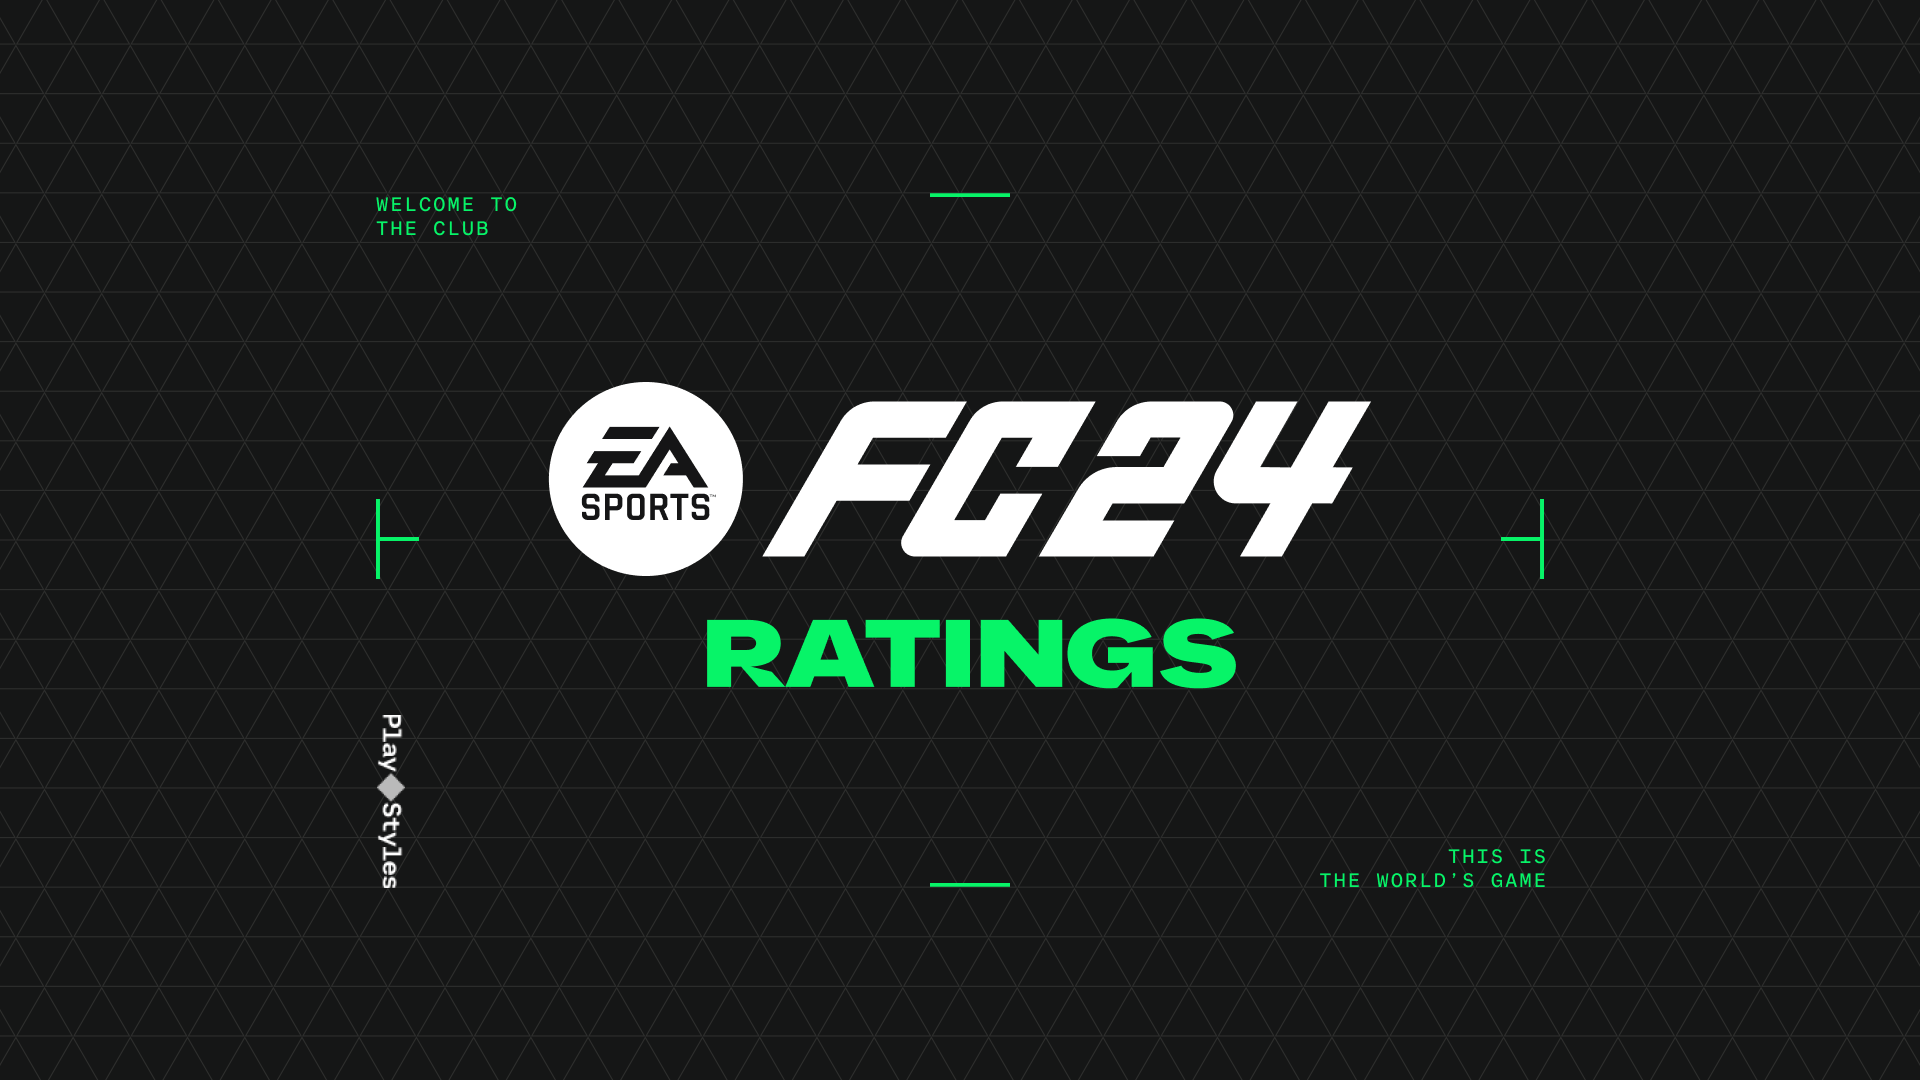 A Sneak Peek into Charlotte FC Player Ratings in the New EA Sports FC 24